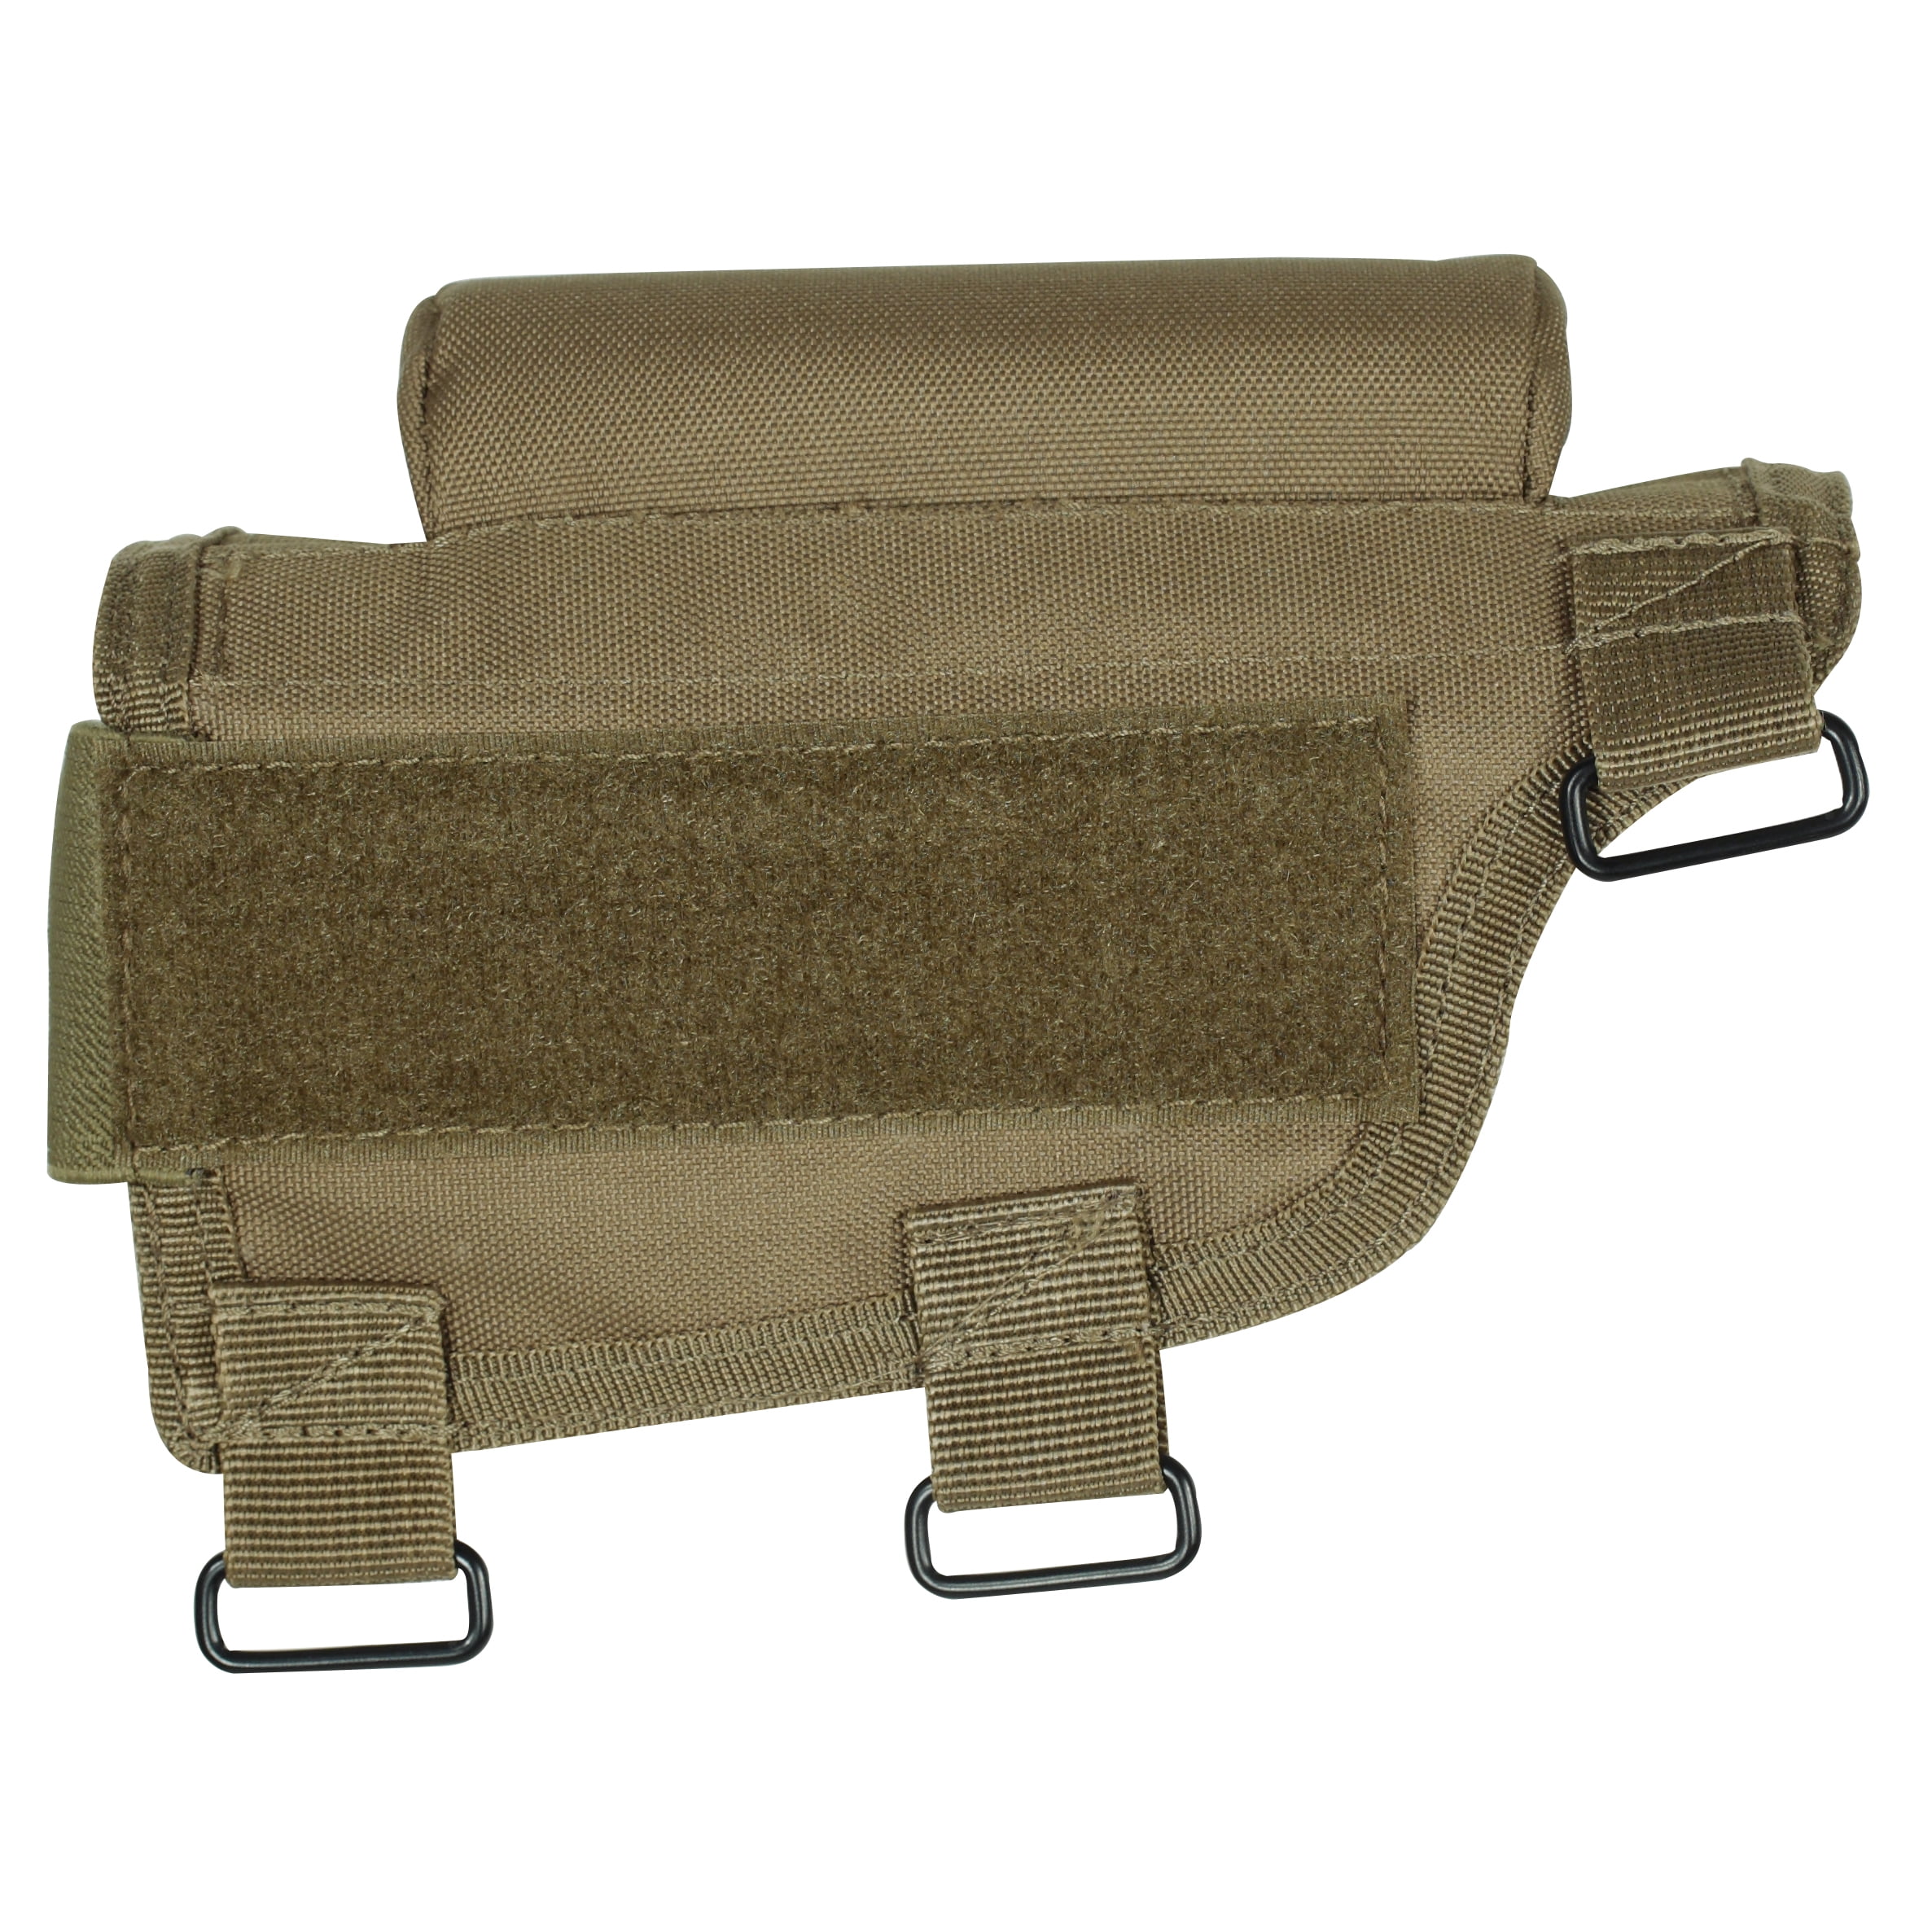 Voodoo Adjustable Cheek Rest with Ammo Pouch (Shooting Gear Category) 